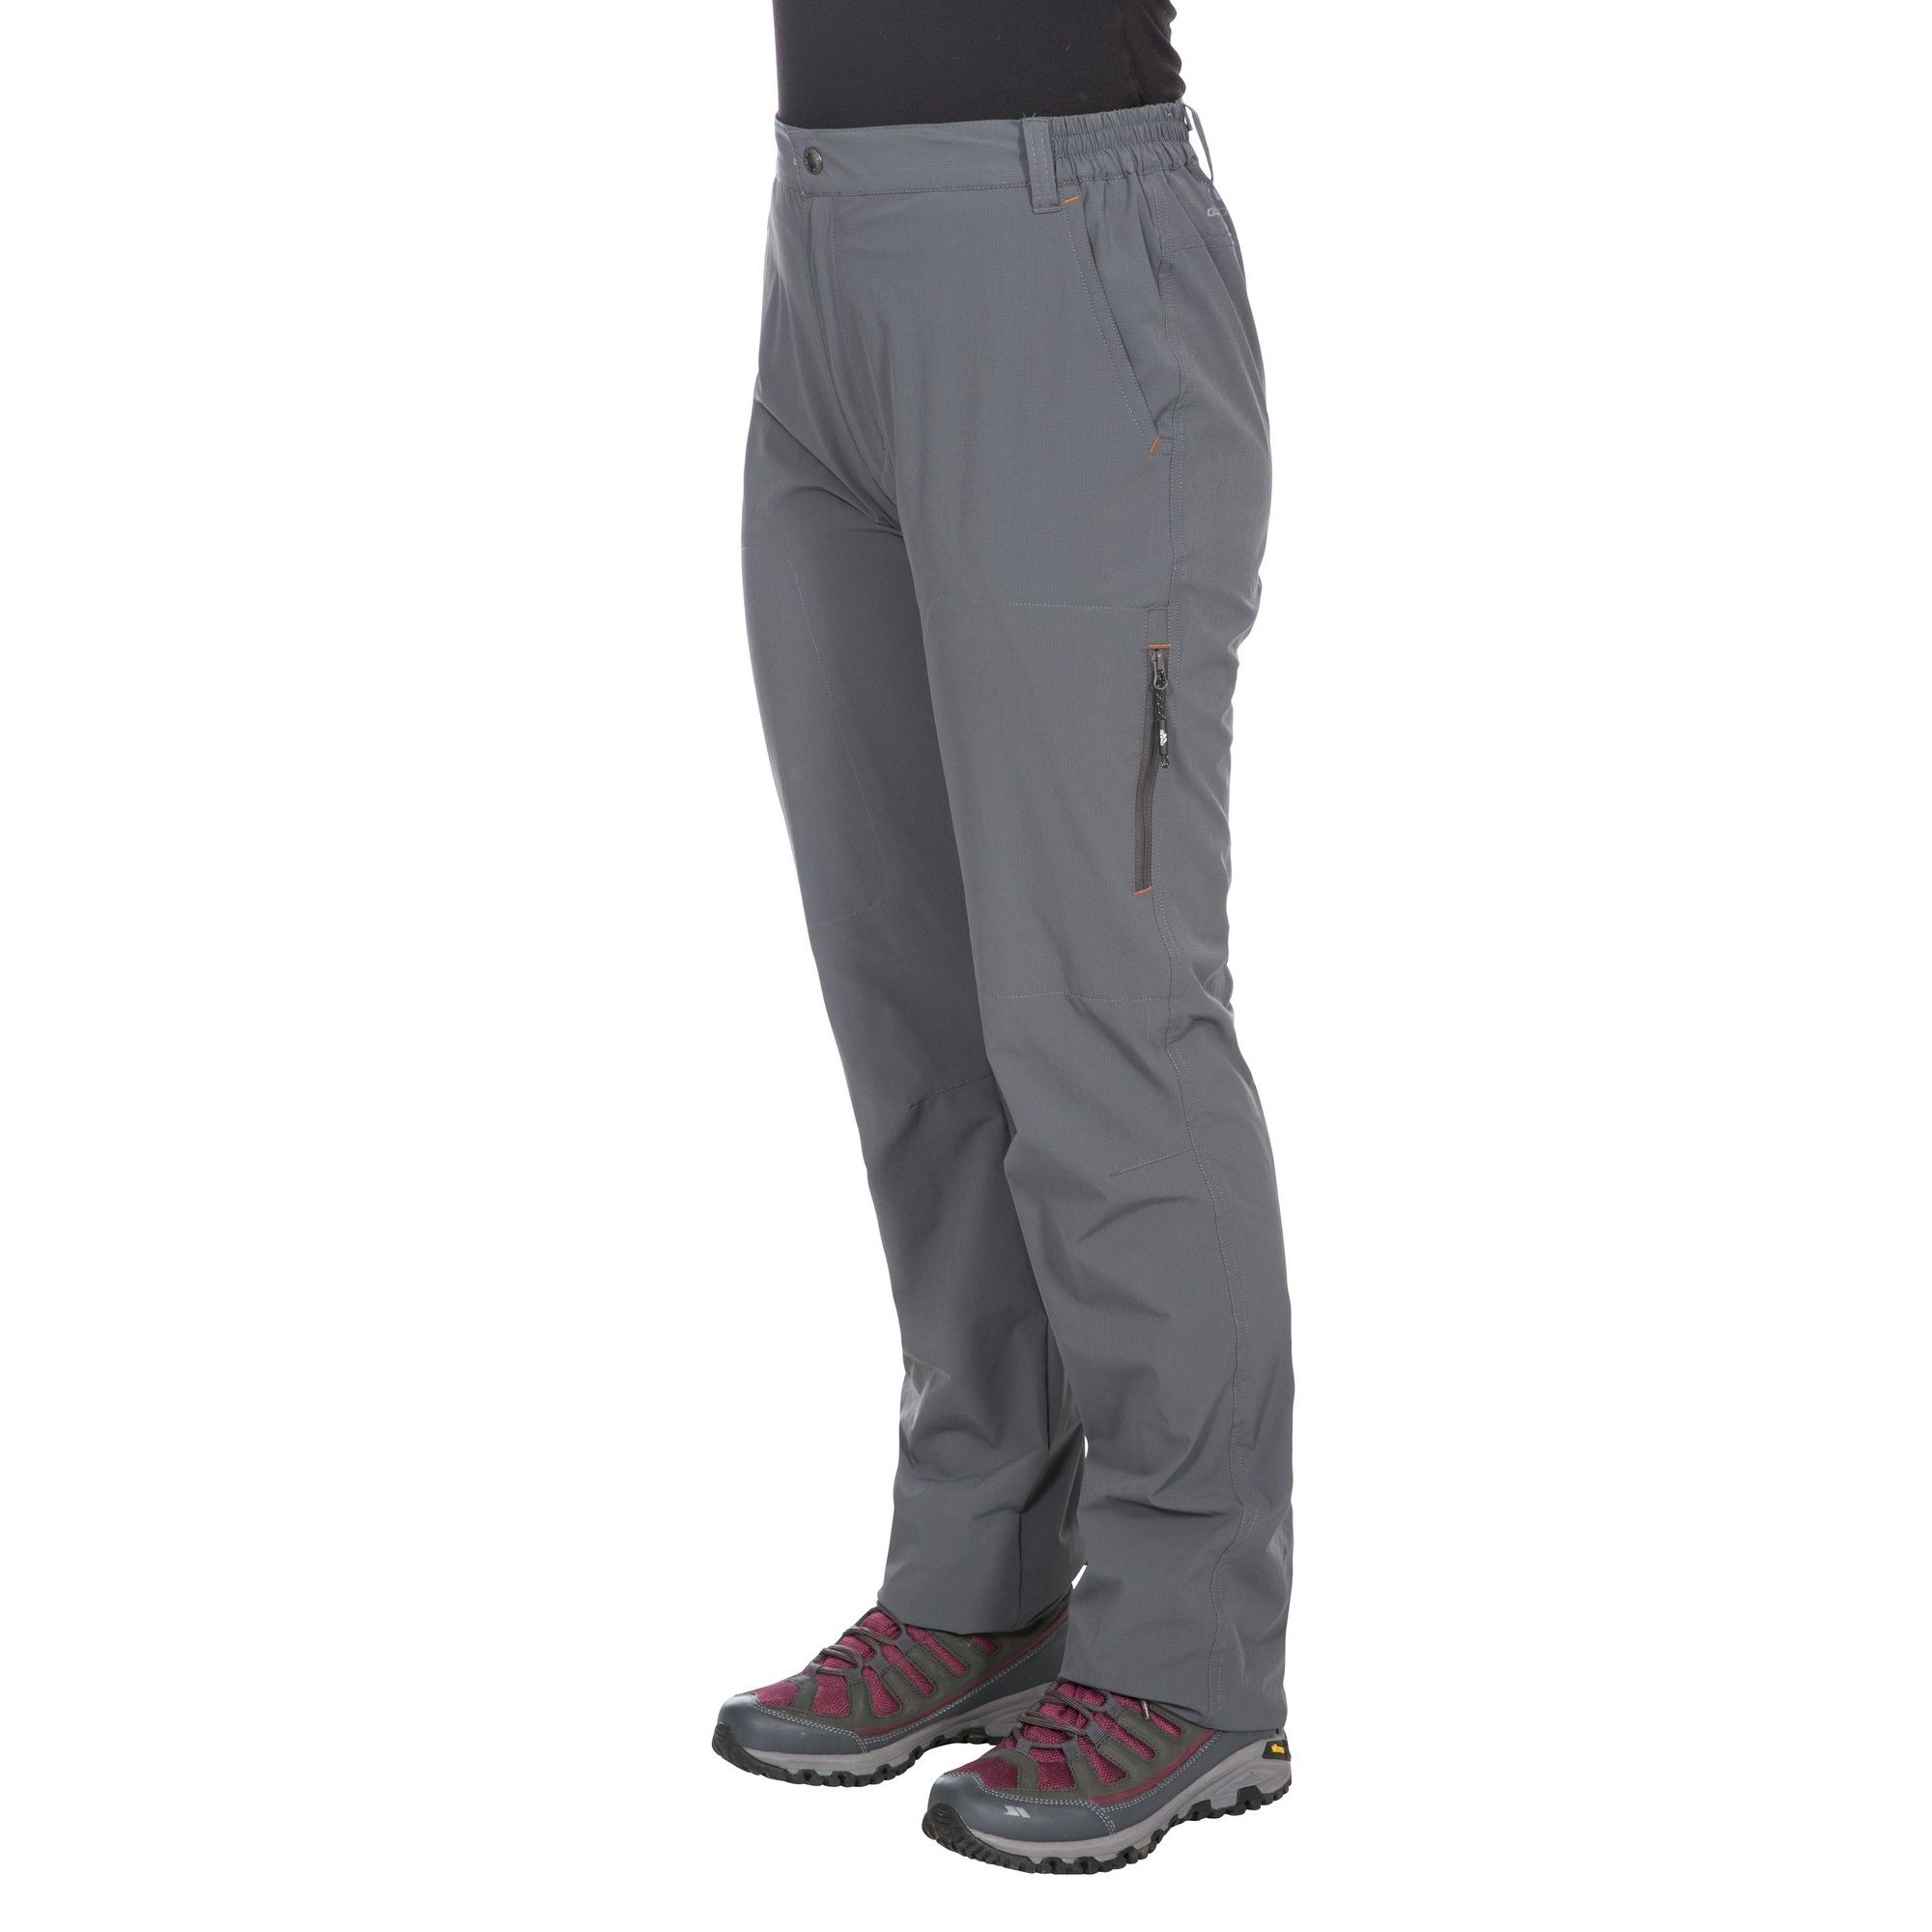 Ripstop fabric with stretch side waist elastic. 3 zip pockets. 2 pockets. Knee darts. Quick dry. Comfort stretch. UV 40+. 88% Polyamide, 12% Elastane. Trespass Womens Waist Sizing (approx): XS/8 - 25in/66cm, S/10 - 28in/71cm, M/12 - 30in/76cm, L/14 - 32in/81cm, XL/16 - 34in/86cm, XXL/18 - 36in/91.5cm.